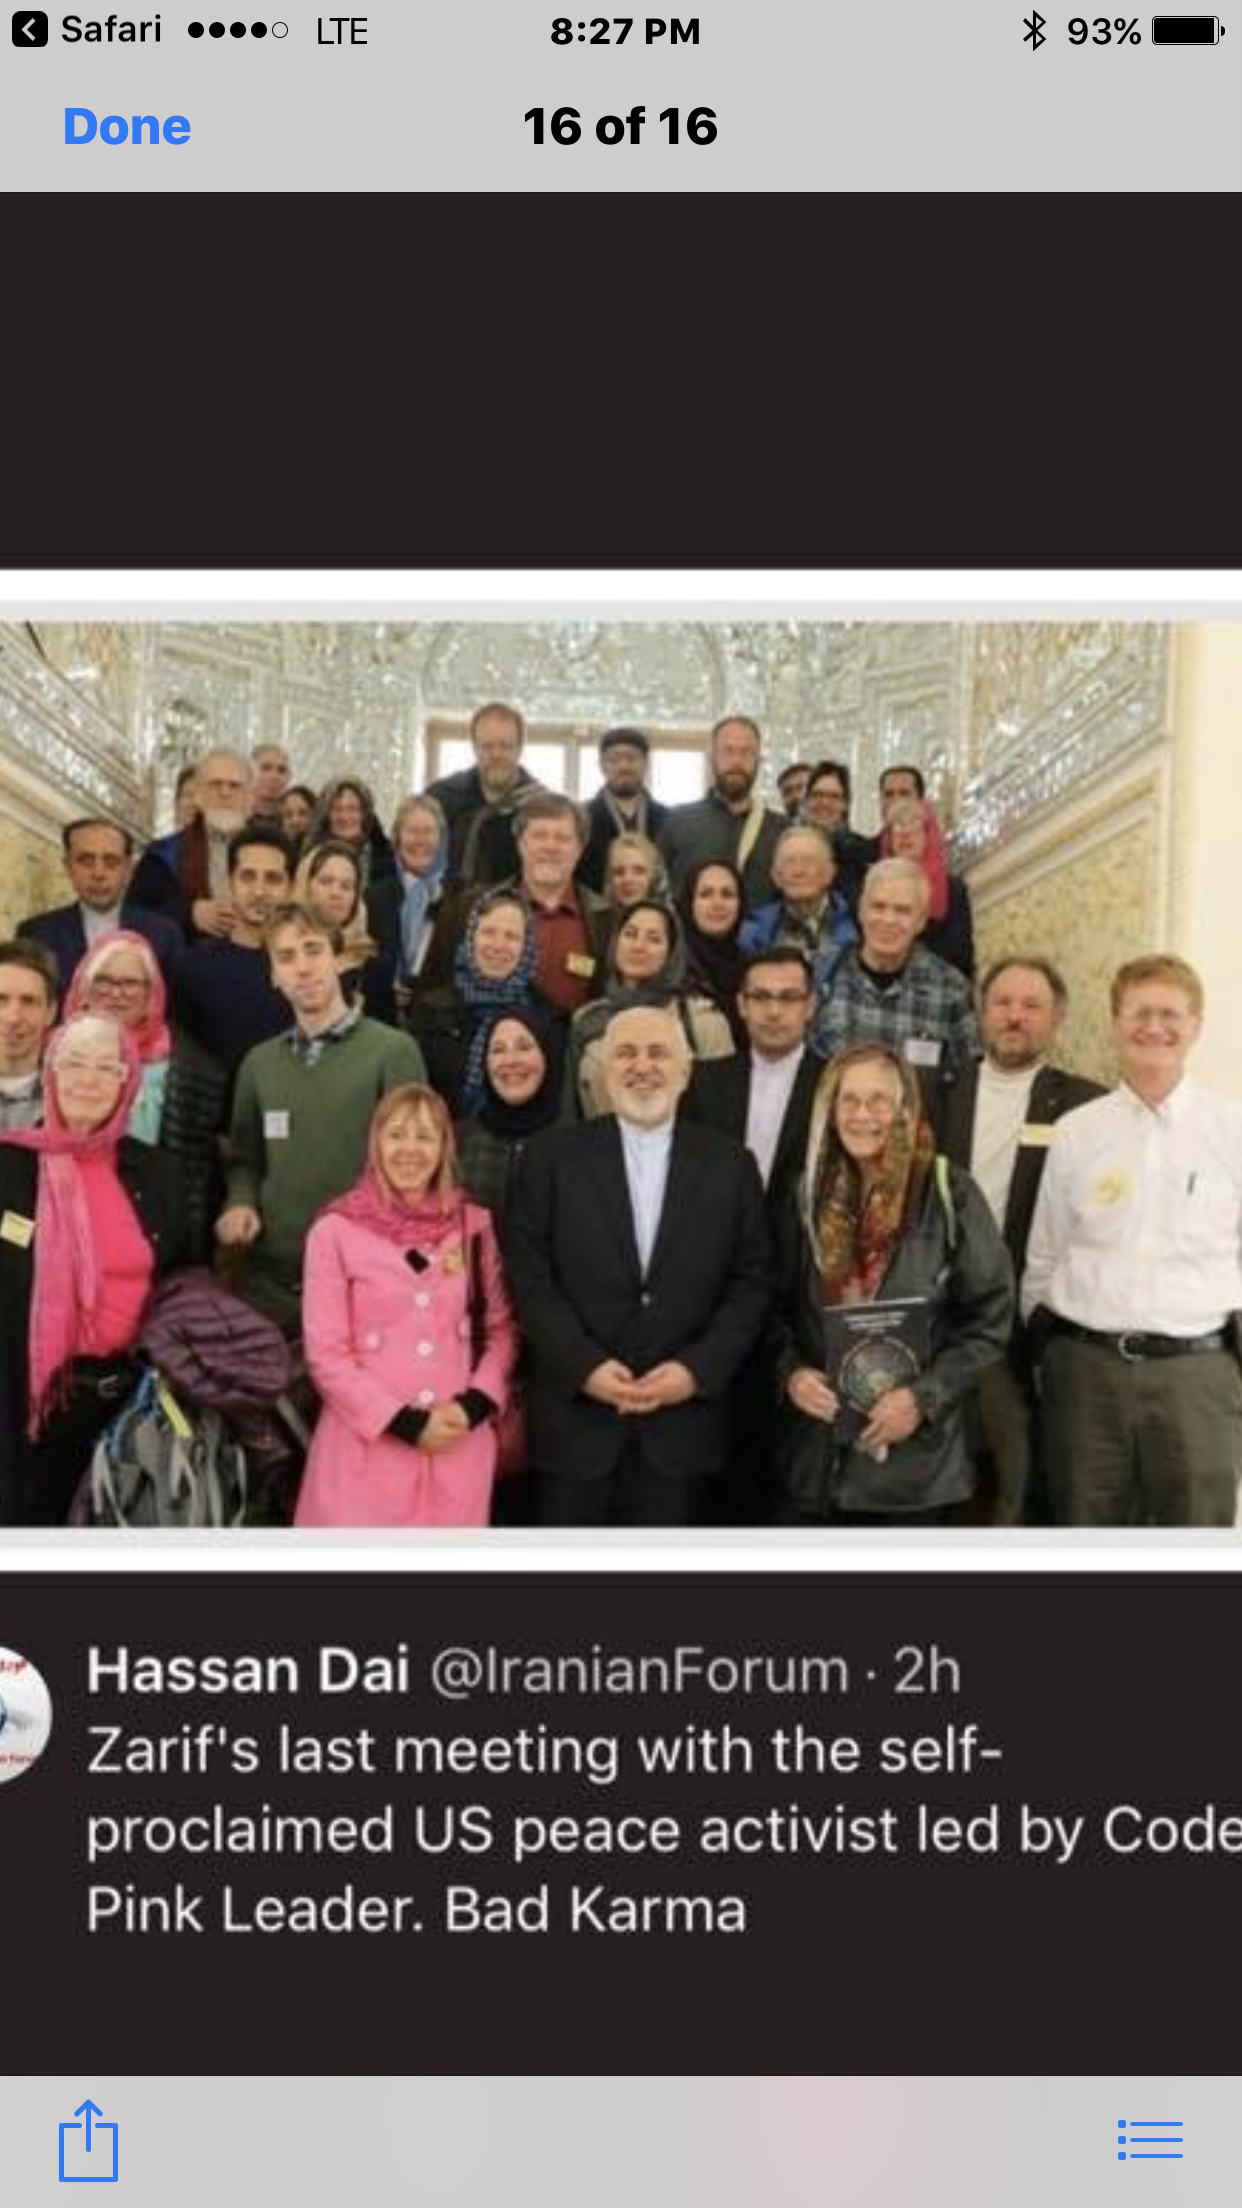 There Is Nothing Pink About Code Pink, Except Maybe The Blood From The Murder Of Iranian Women And Girls They Help The Regime Cover Up